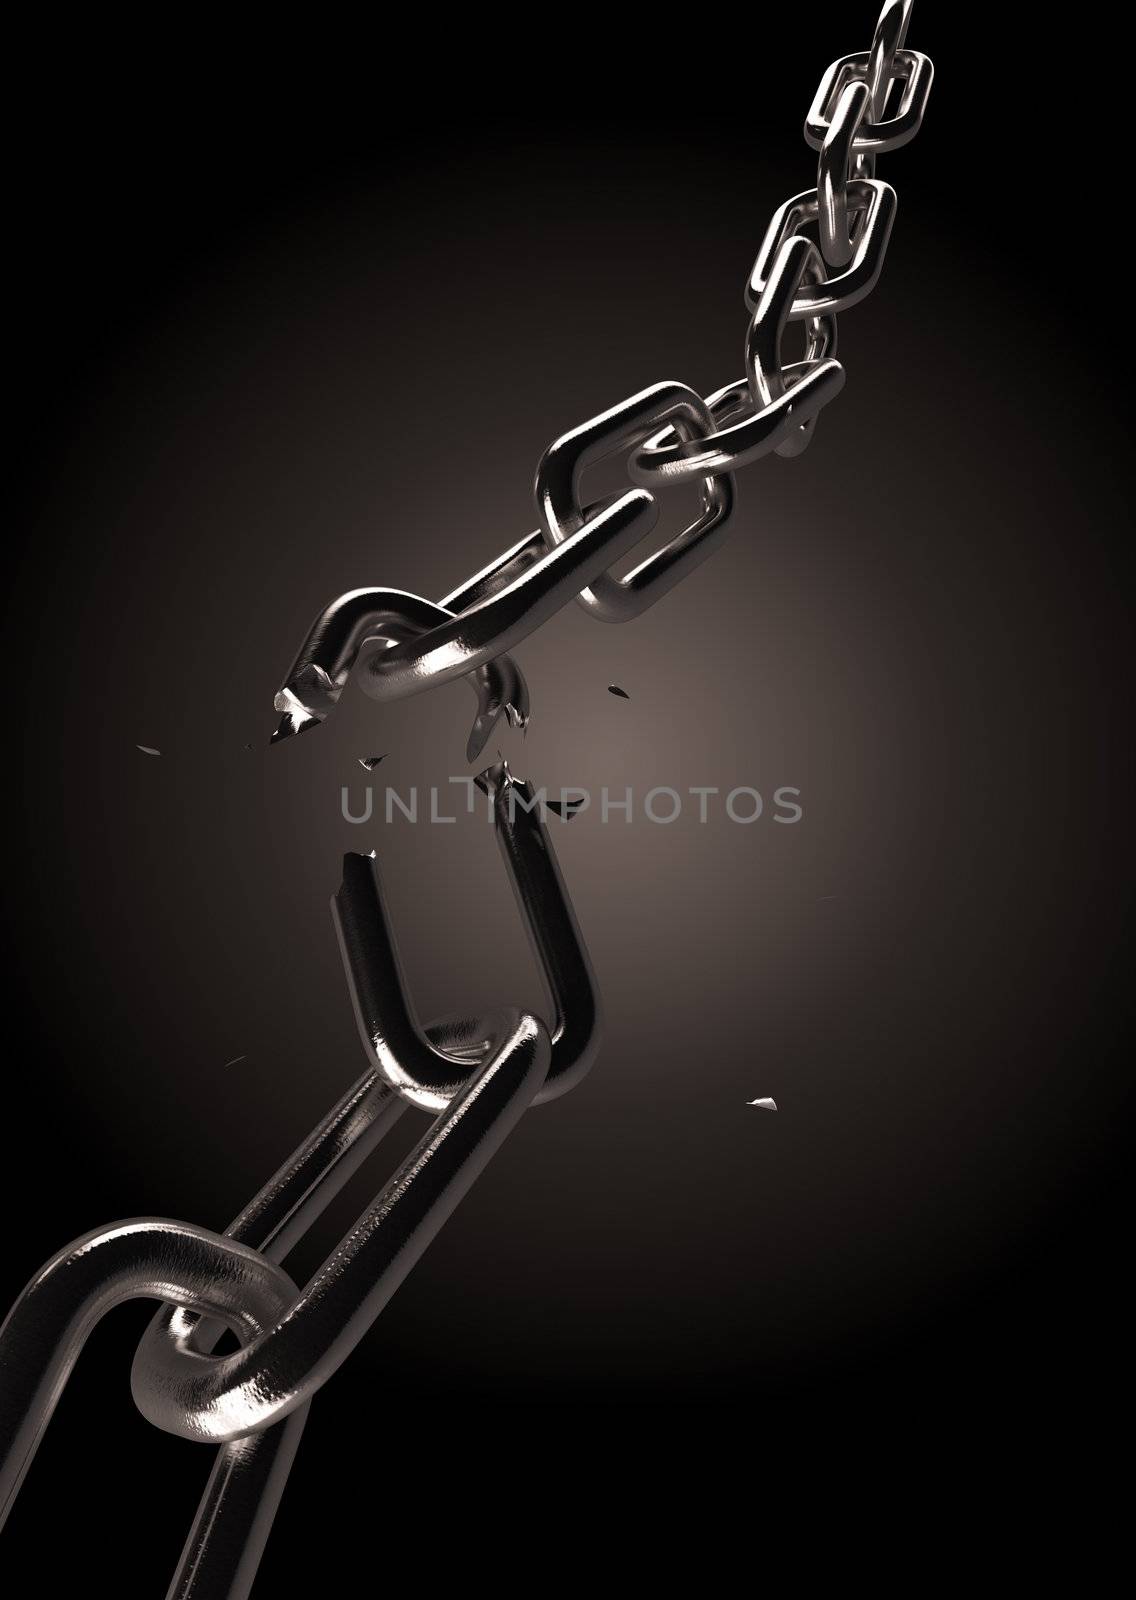 Metal chain with broken part and falling pieces